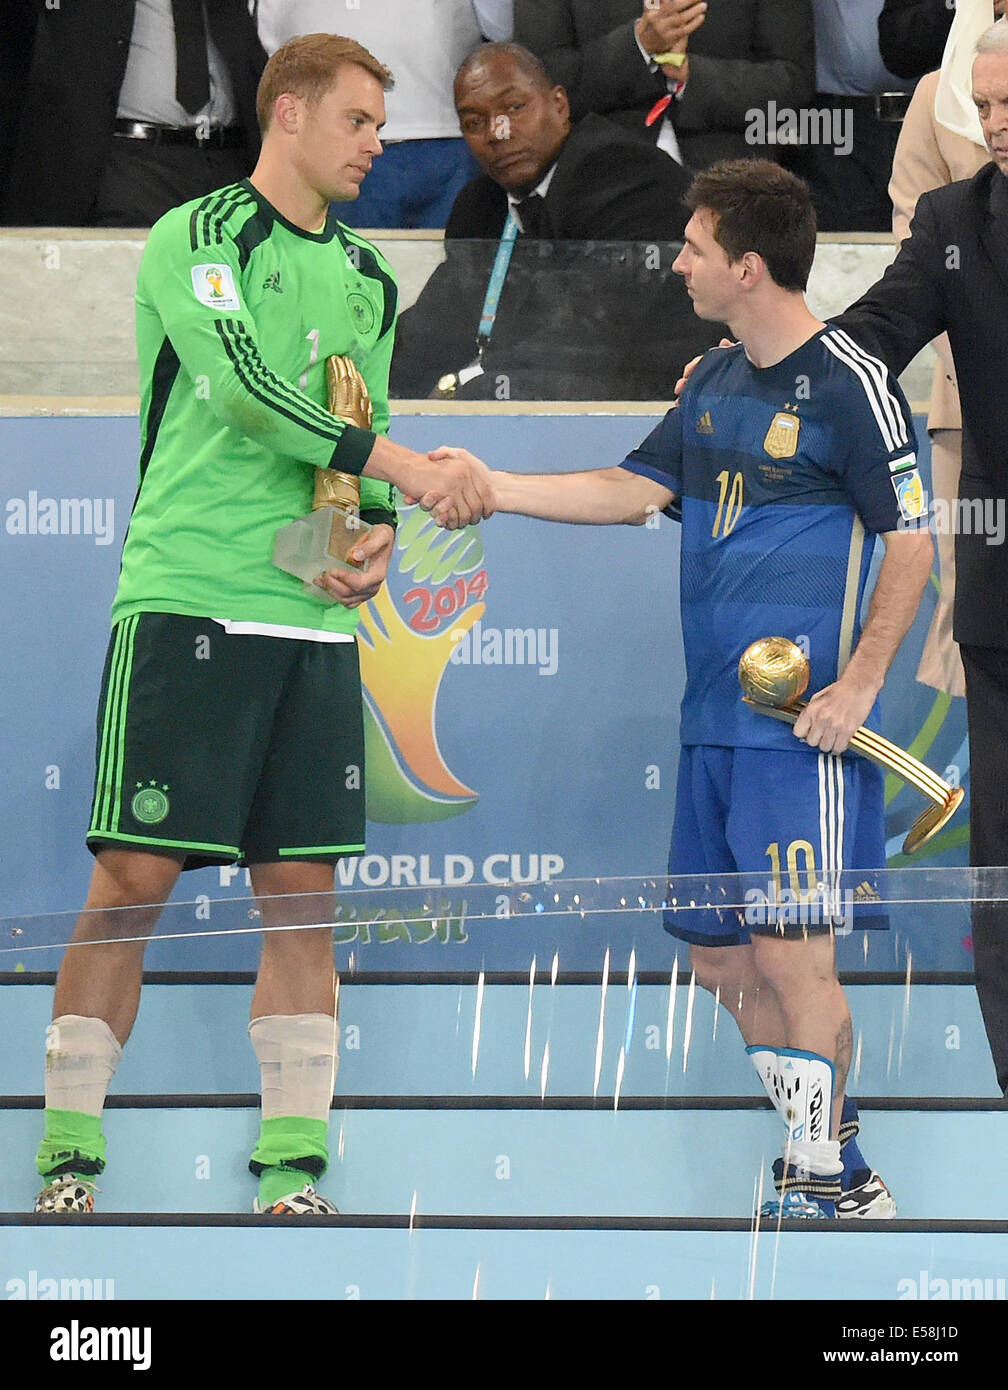 Rio de Janeiro, Brazil. 13th July, 2014. Goalkeeper Manuel Neuer of Germany (L) and Lionel Messi of Argentina shakes hands after being awarded as best goalkeeper aqnd the golden glove and the best player with the golden ball after the FIFA World Cup 2014 final between Germany and Argentina at the Estadio do Maracana in Rio de Janeiro, Brazil, 13 July 2014. © Action Plus Sports/Alamy Live News Stock Photo